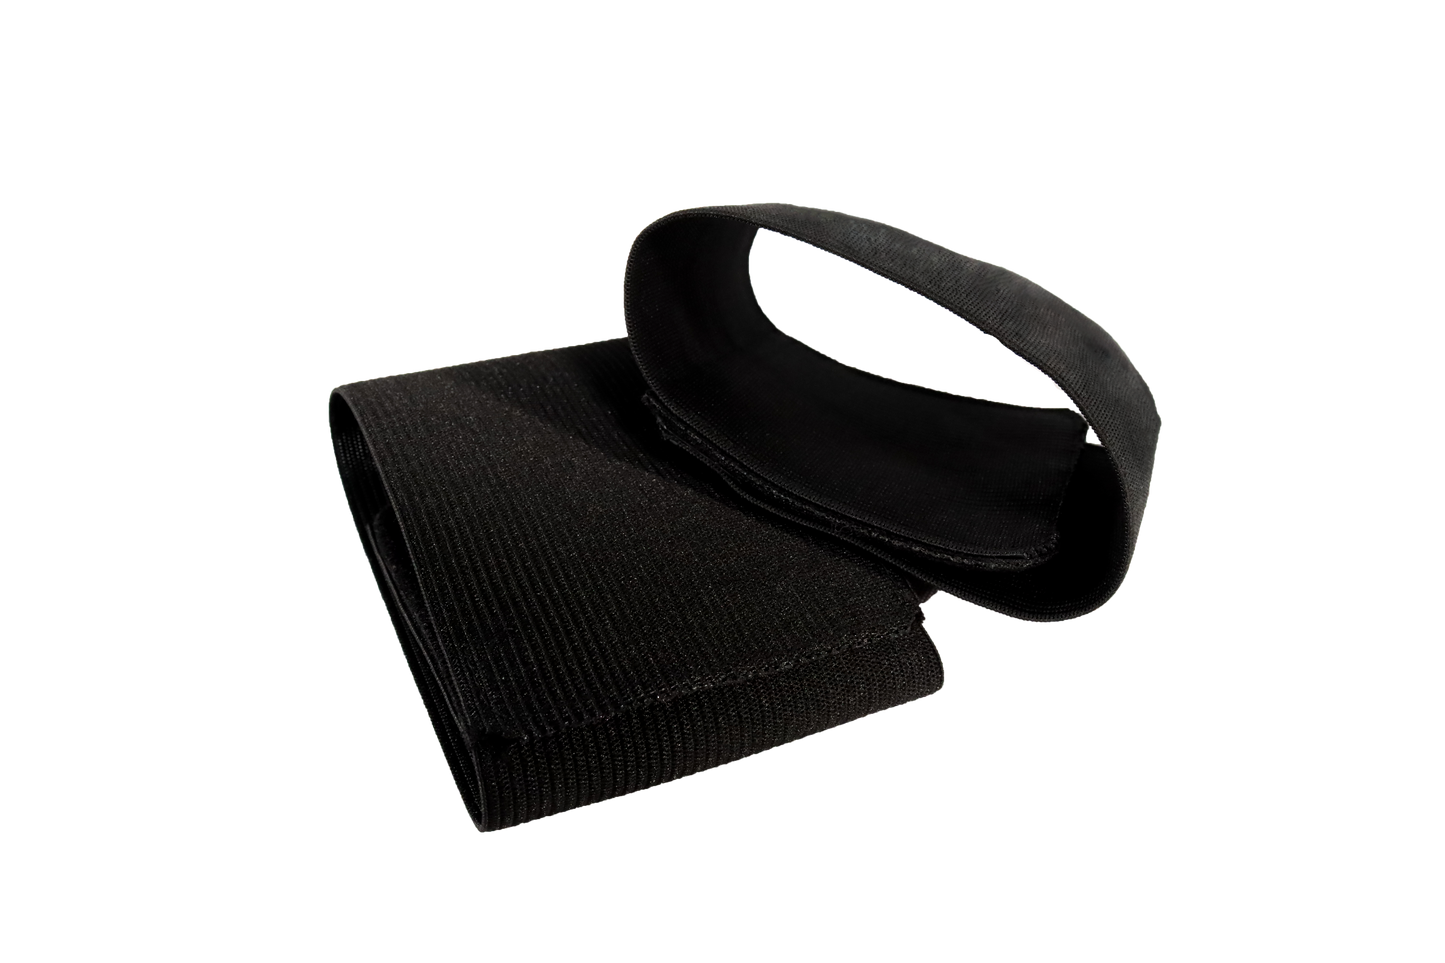 Foot Compression Straps - Pair